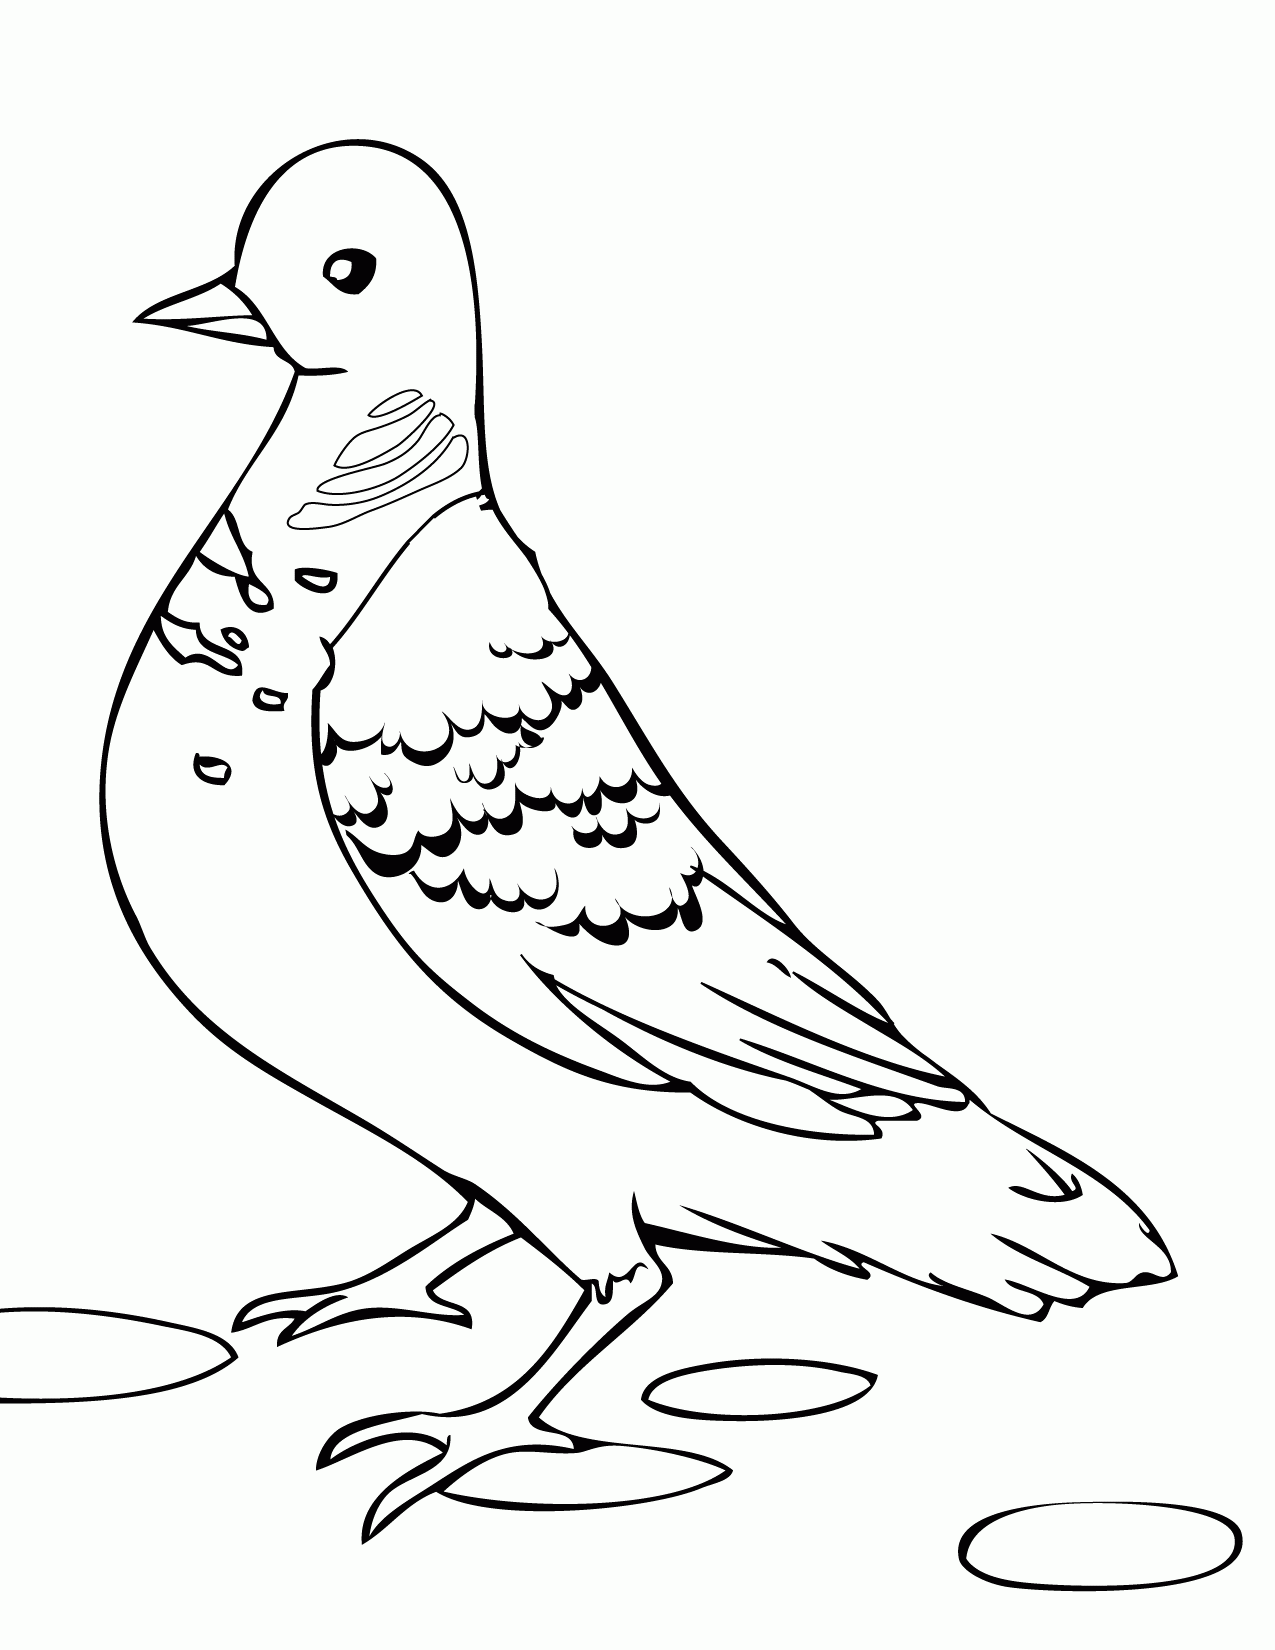 New Dove Coloring Page for Adult